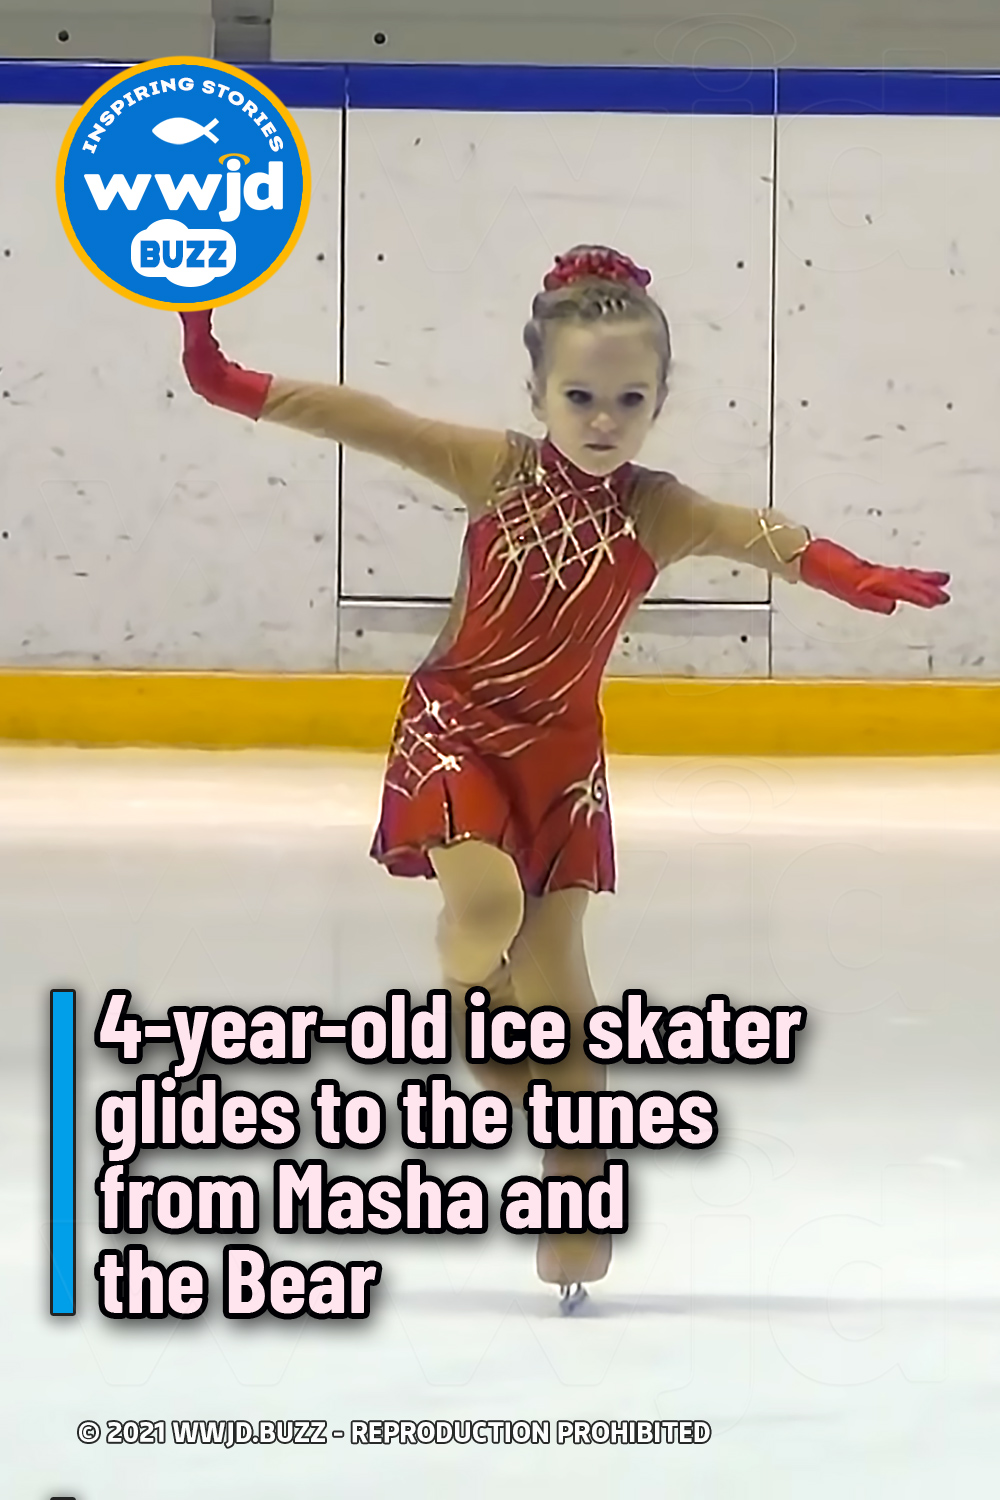 4-year-old ice skater glides to the tunes from Masha and the Bear